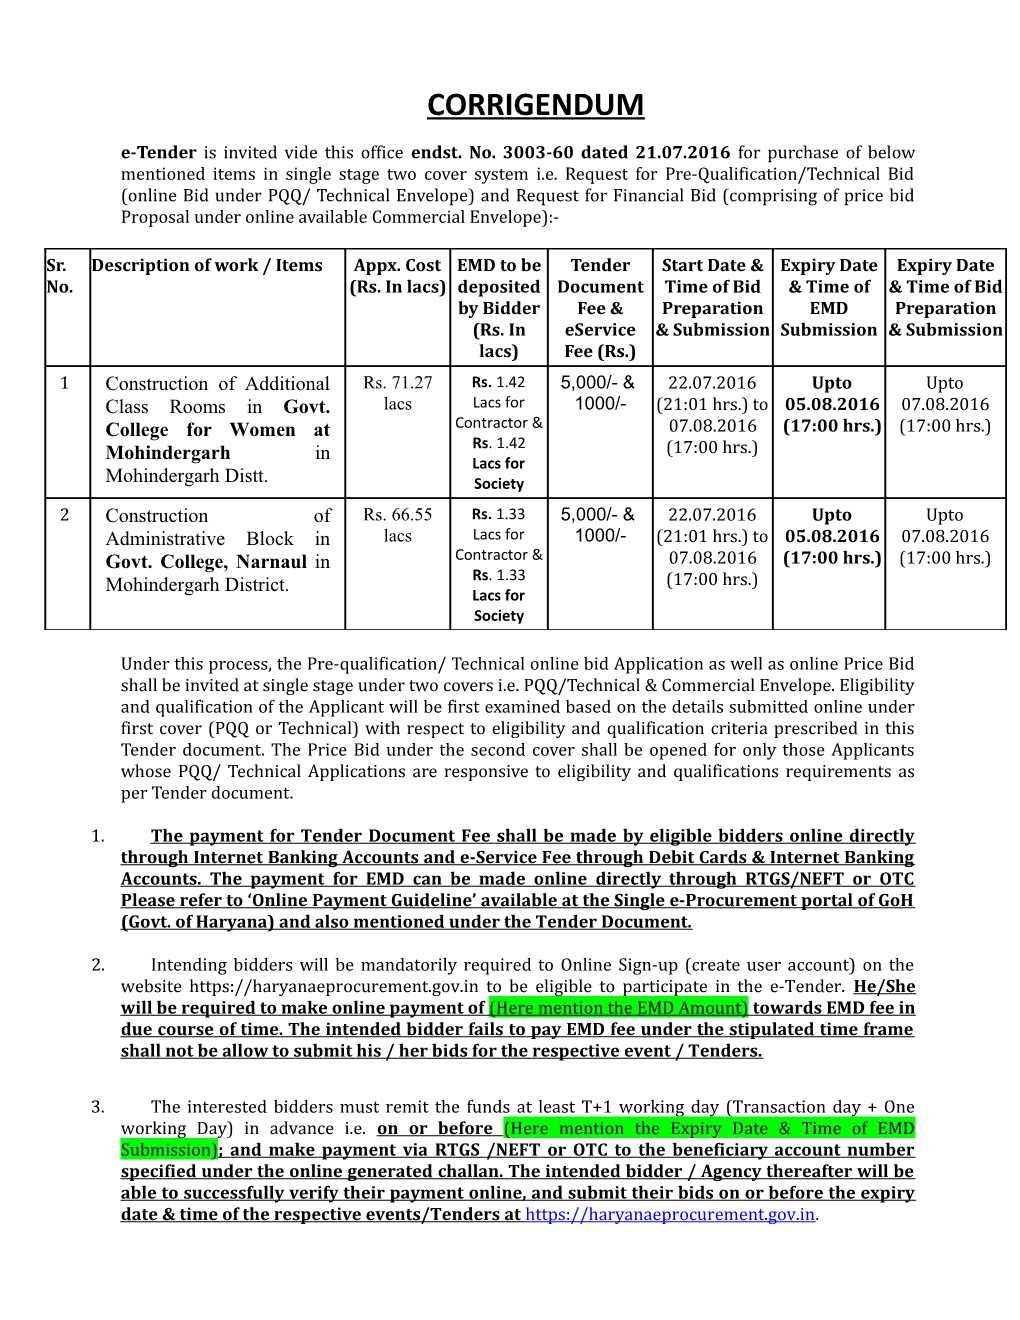 E-Tender Is Invited Vide This Office Endst. No. 3003-60 Dated 21.07.2016 for Purchase Of